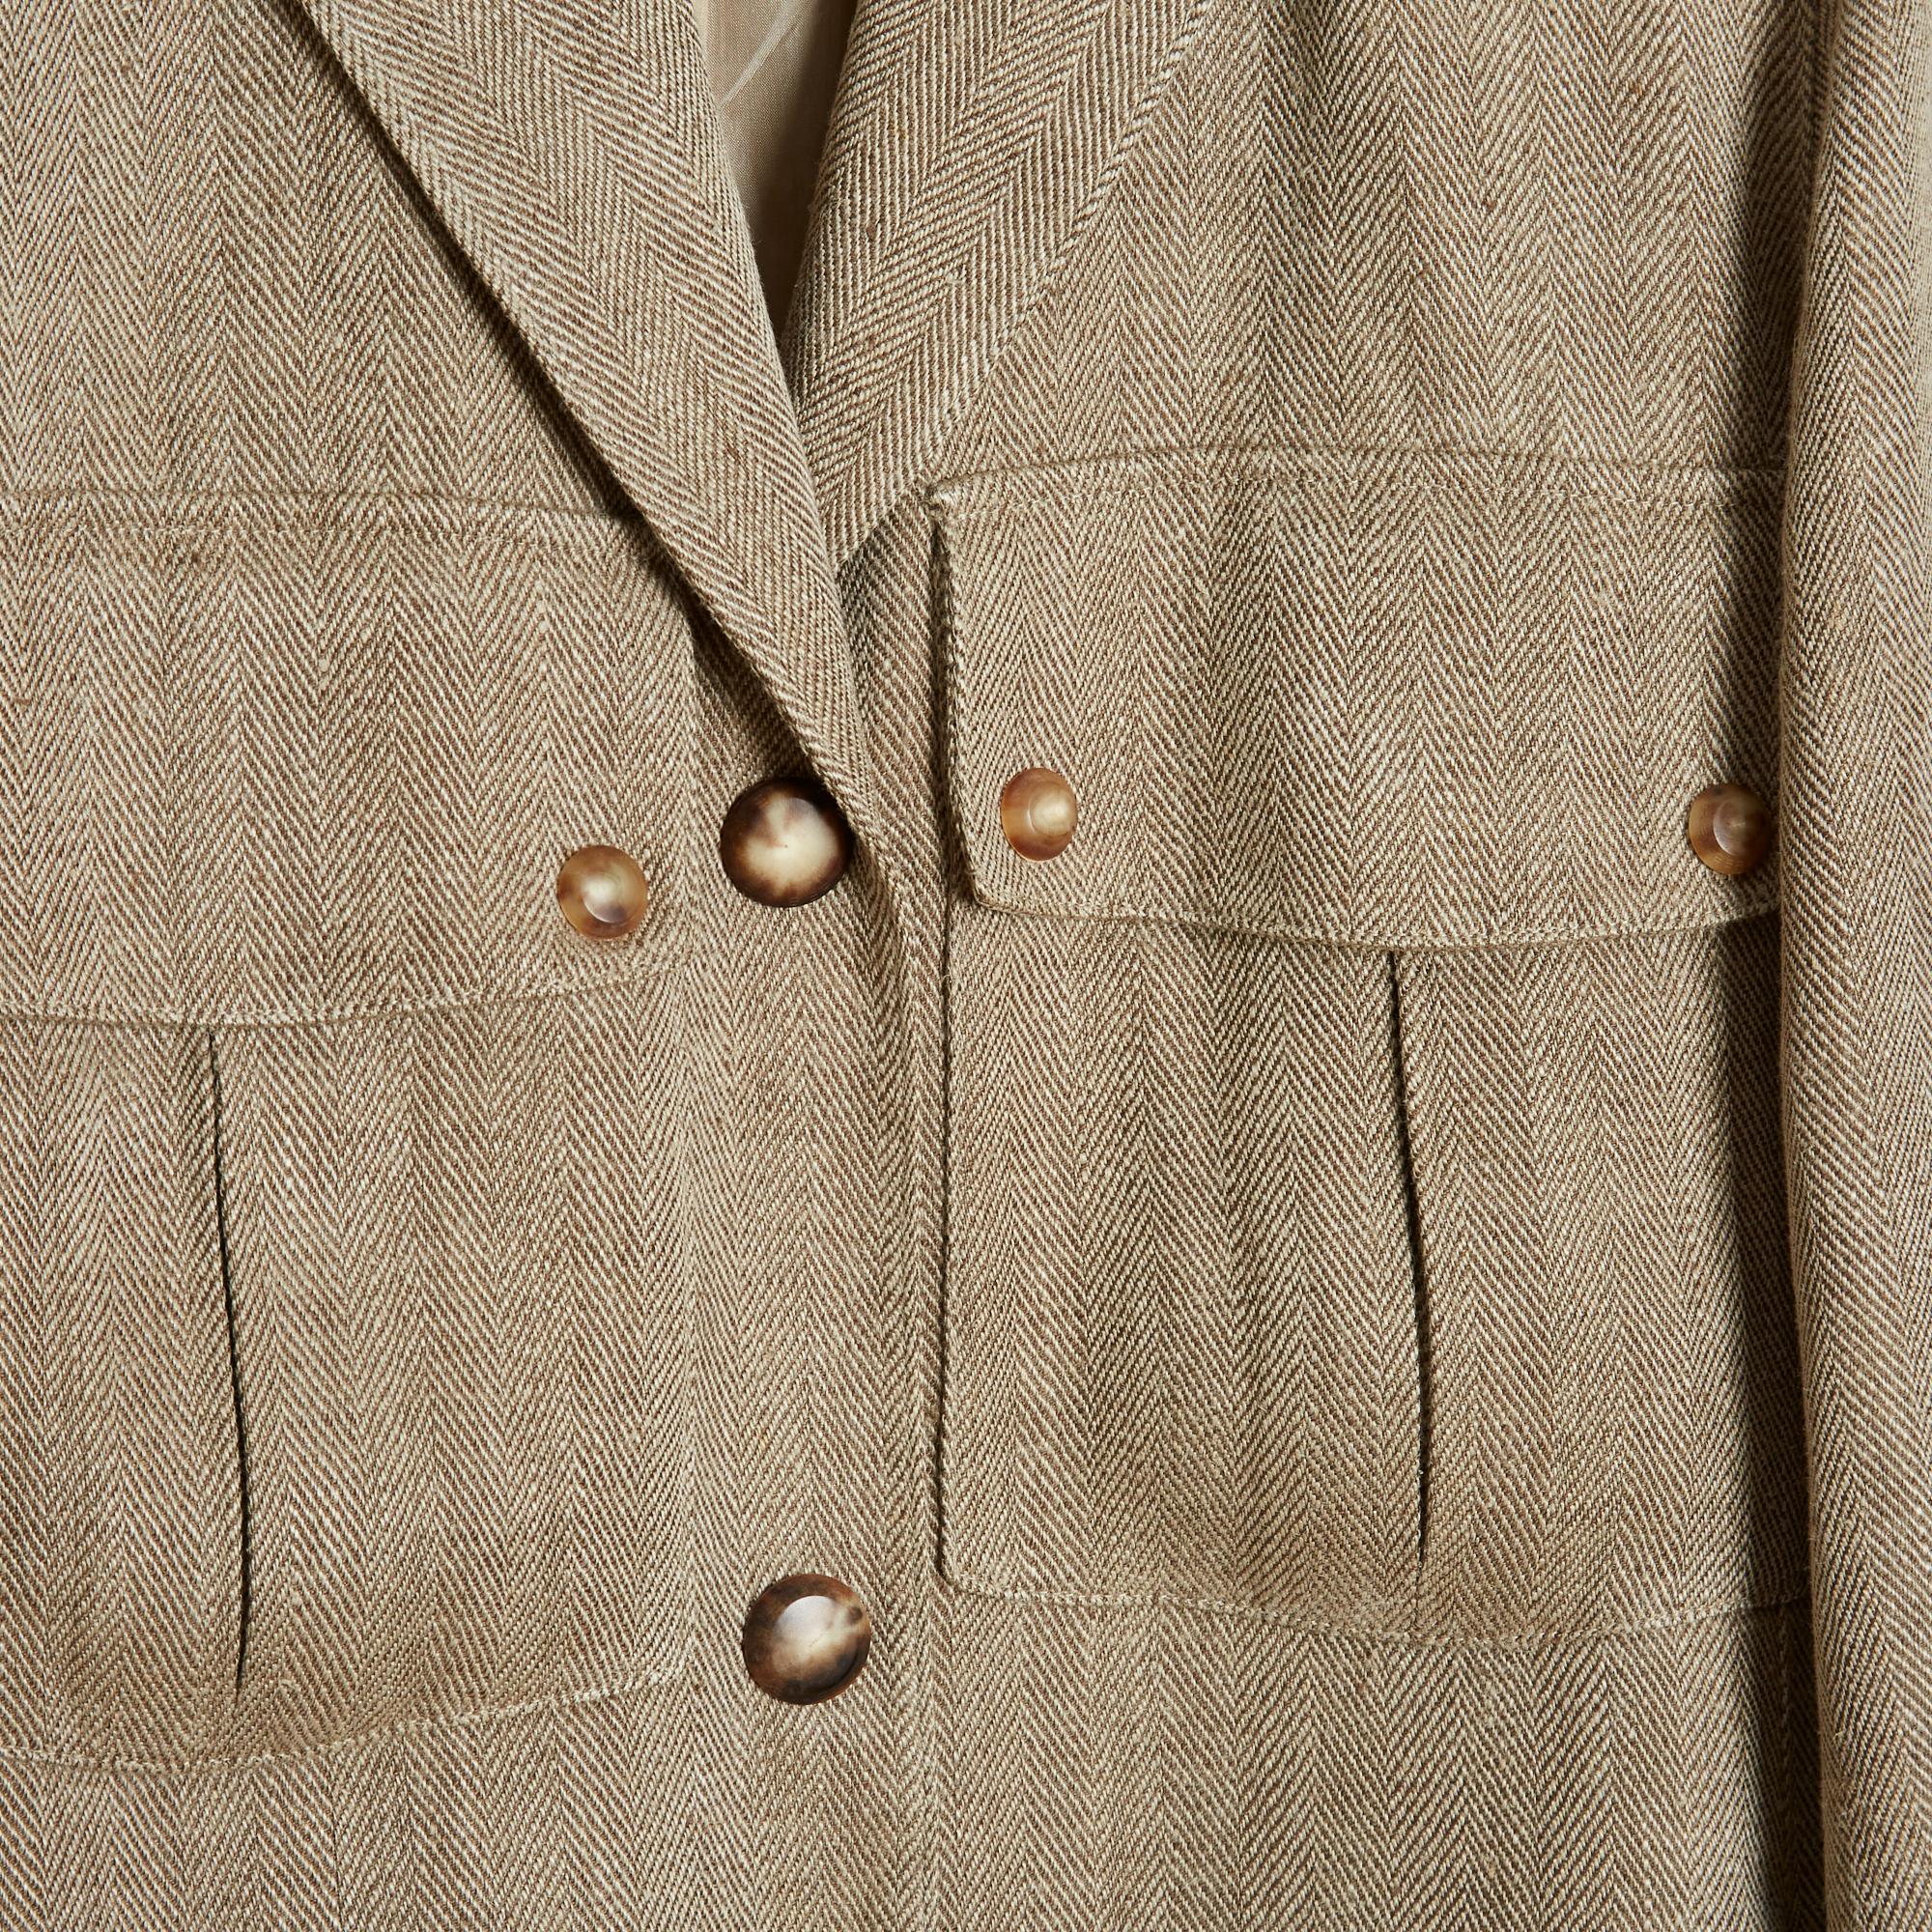 Anne-Marie Beretta coat in linen (and probably wool) with beige herringbone, almost straight cut, small notched collar closed in front with 3 buttons, 2 buttoned flap pockets on the chest, 2 pockets closed with an invisible zip on the sides, sleeves